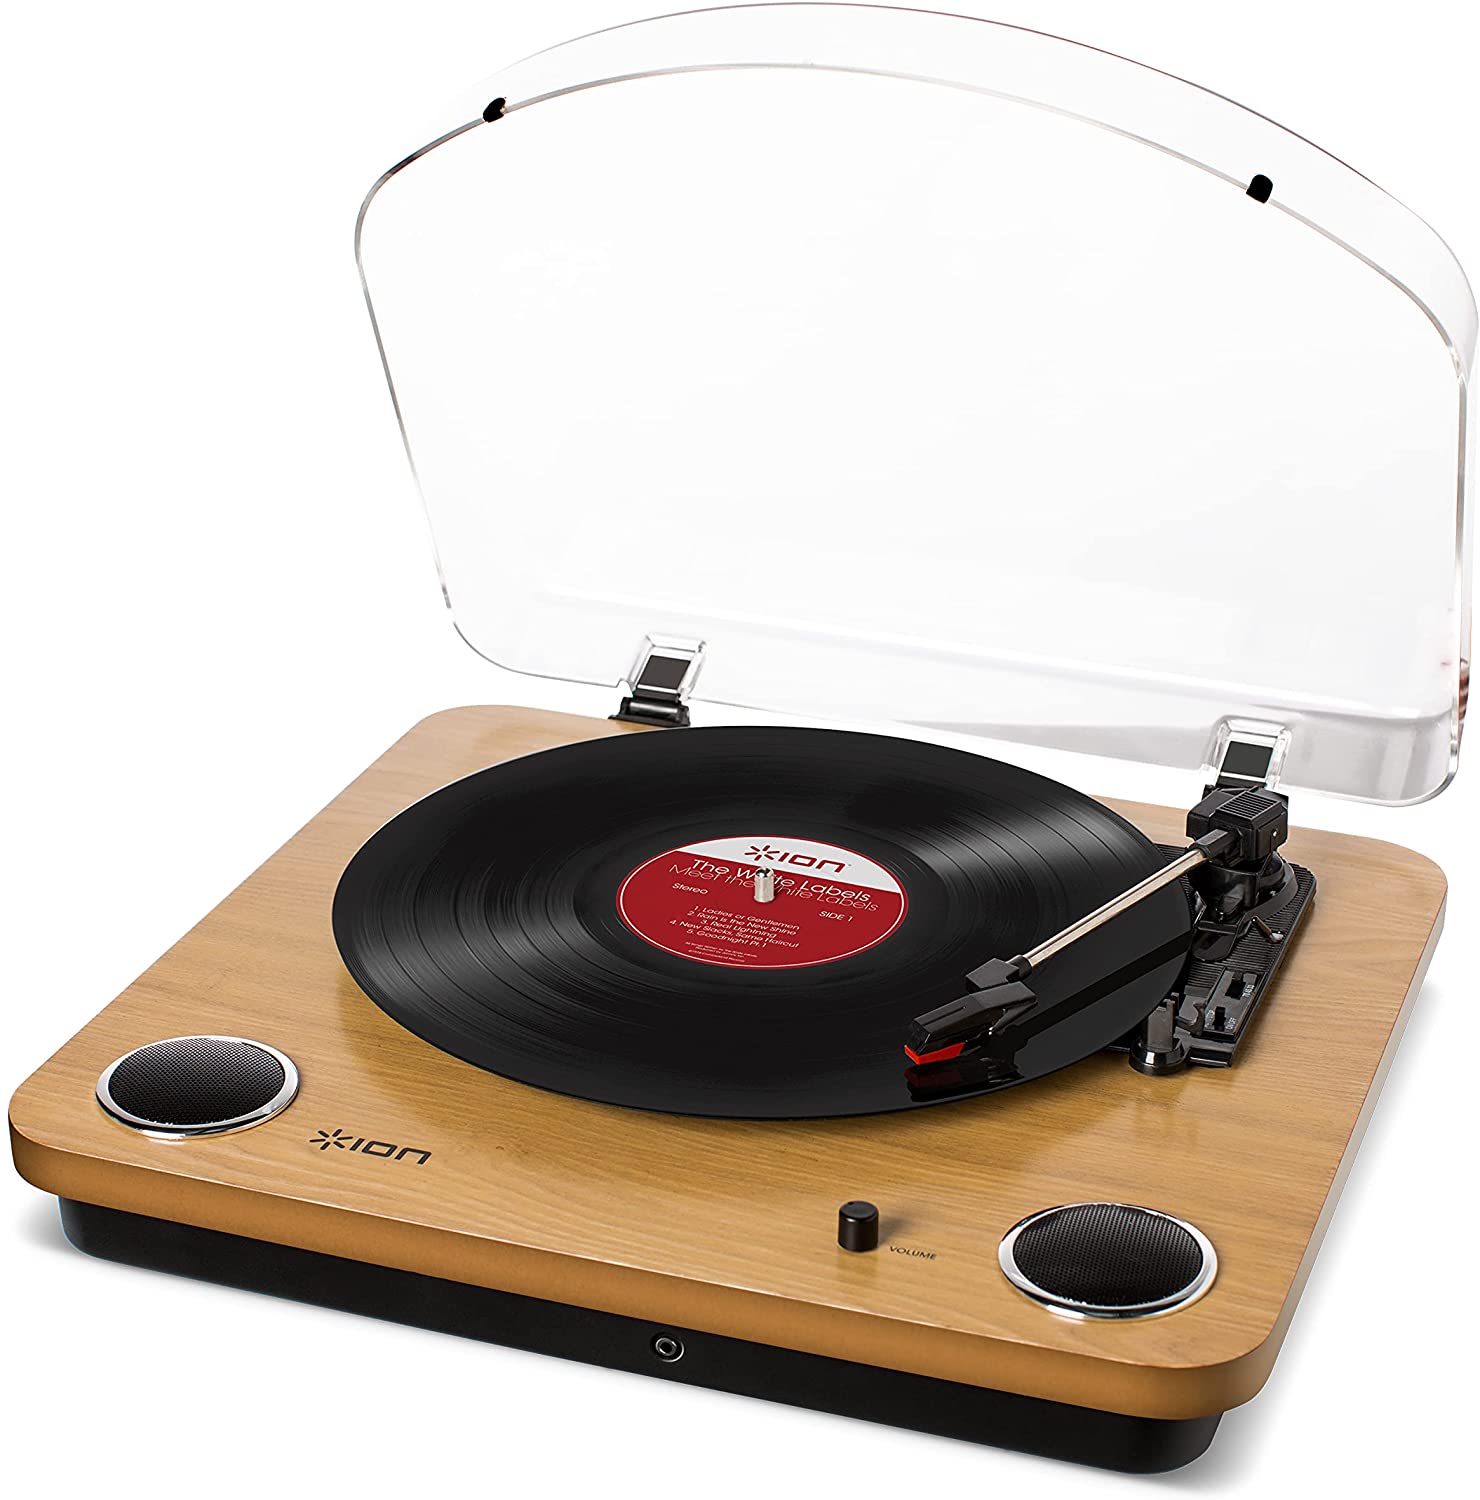 Ion Max Vinyl Record Player from Turntable Kitchen's Guide to the Best Turntables under $100